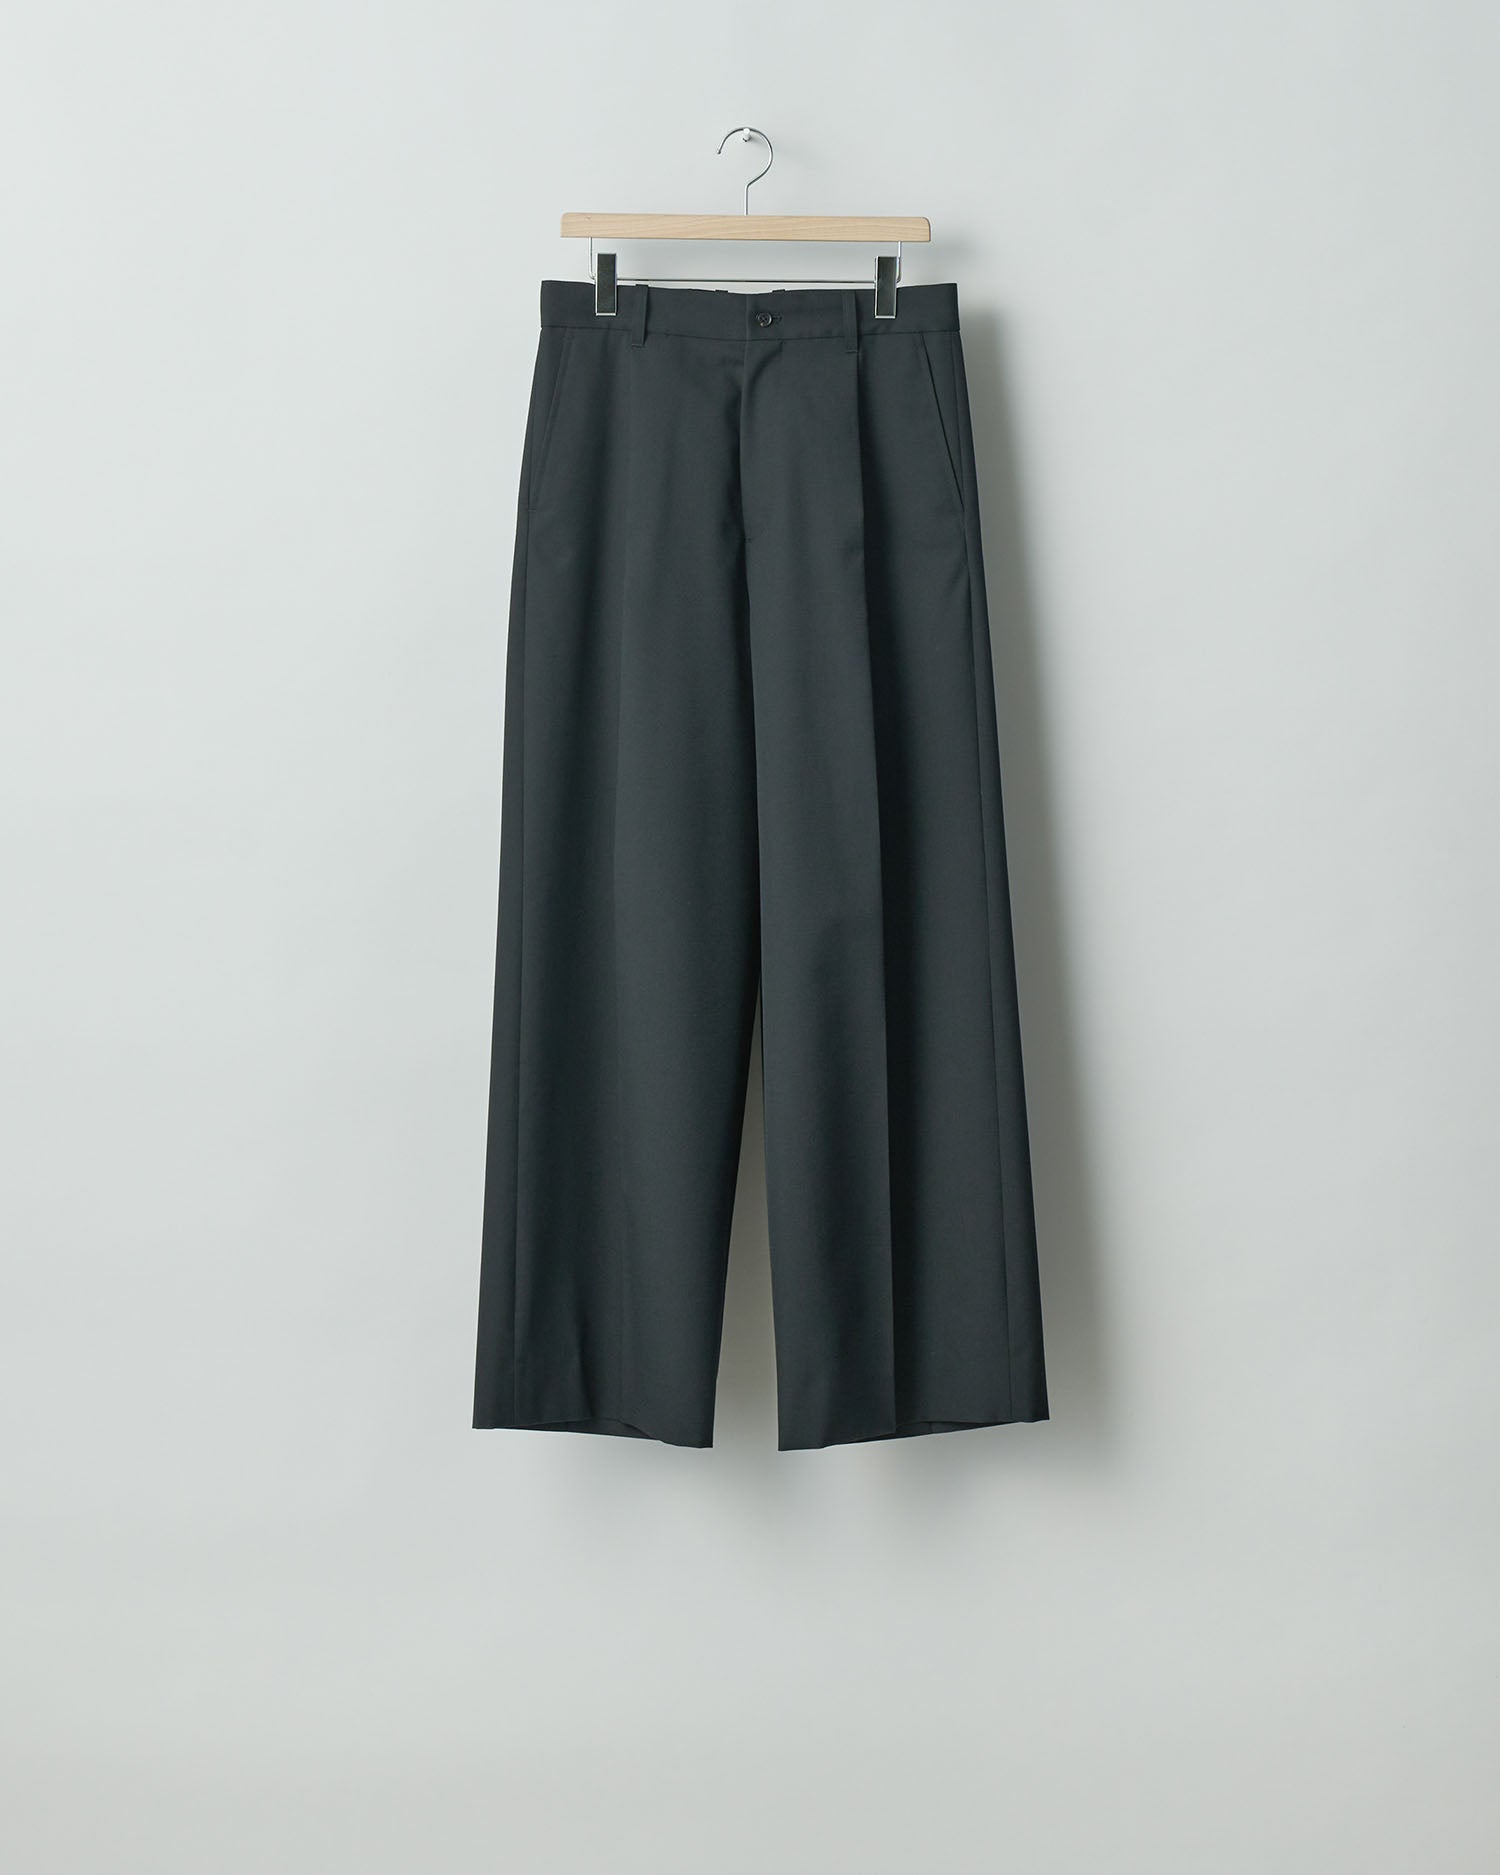 ssstein / シュタイン】EXTRA WIDE TROUSERS - BLACK | 公式通販サイト 